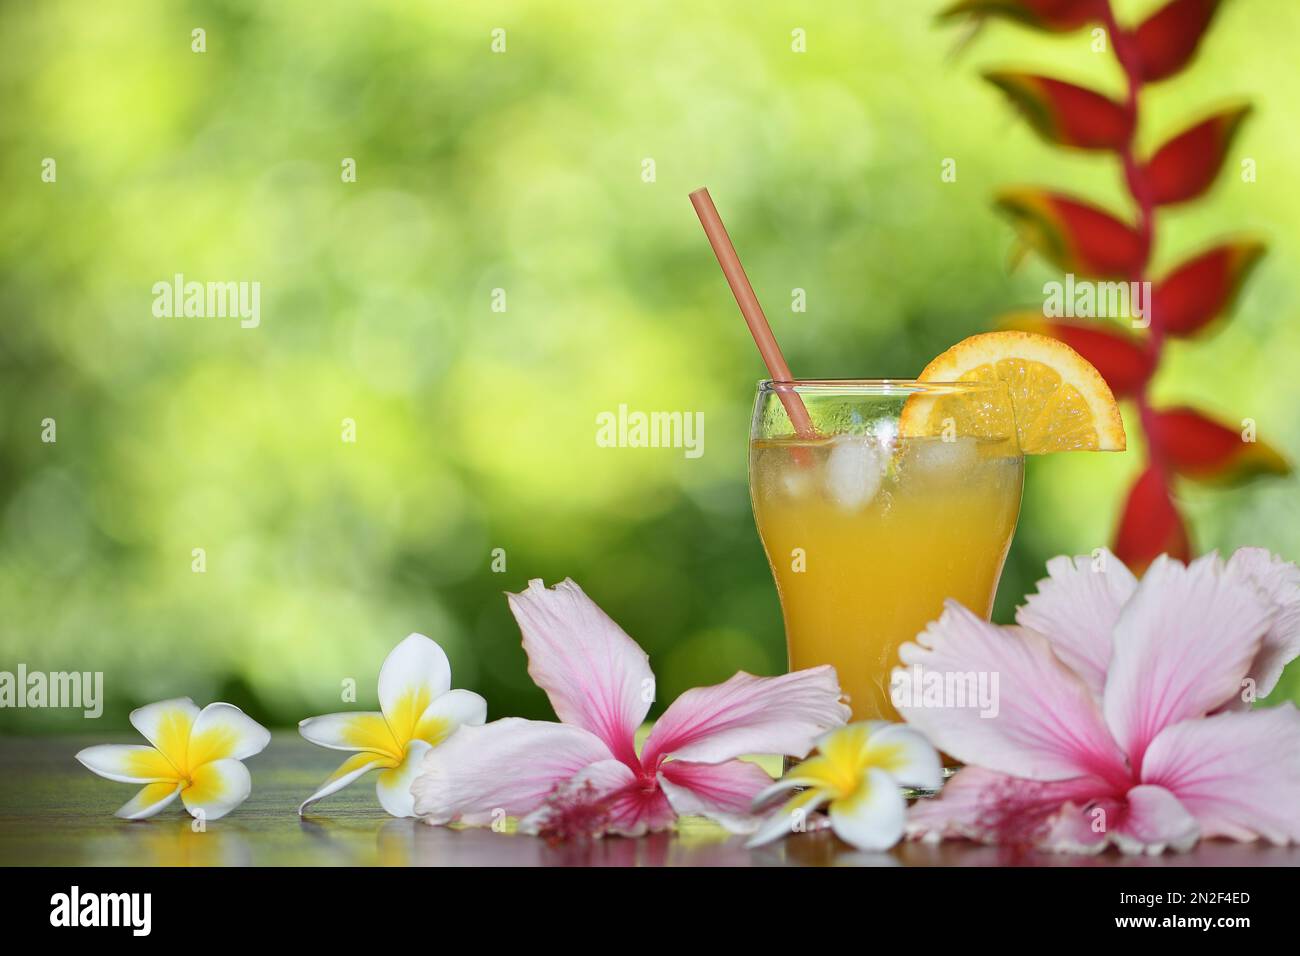 A glass of cold orange juice with a straw and slice of orange, right of frame, in a tropical setting with heliconia, hibiscus & frangipani flowers Stock Photo